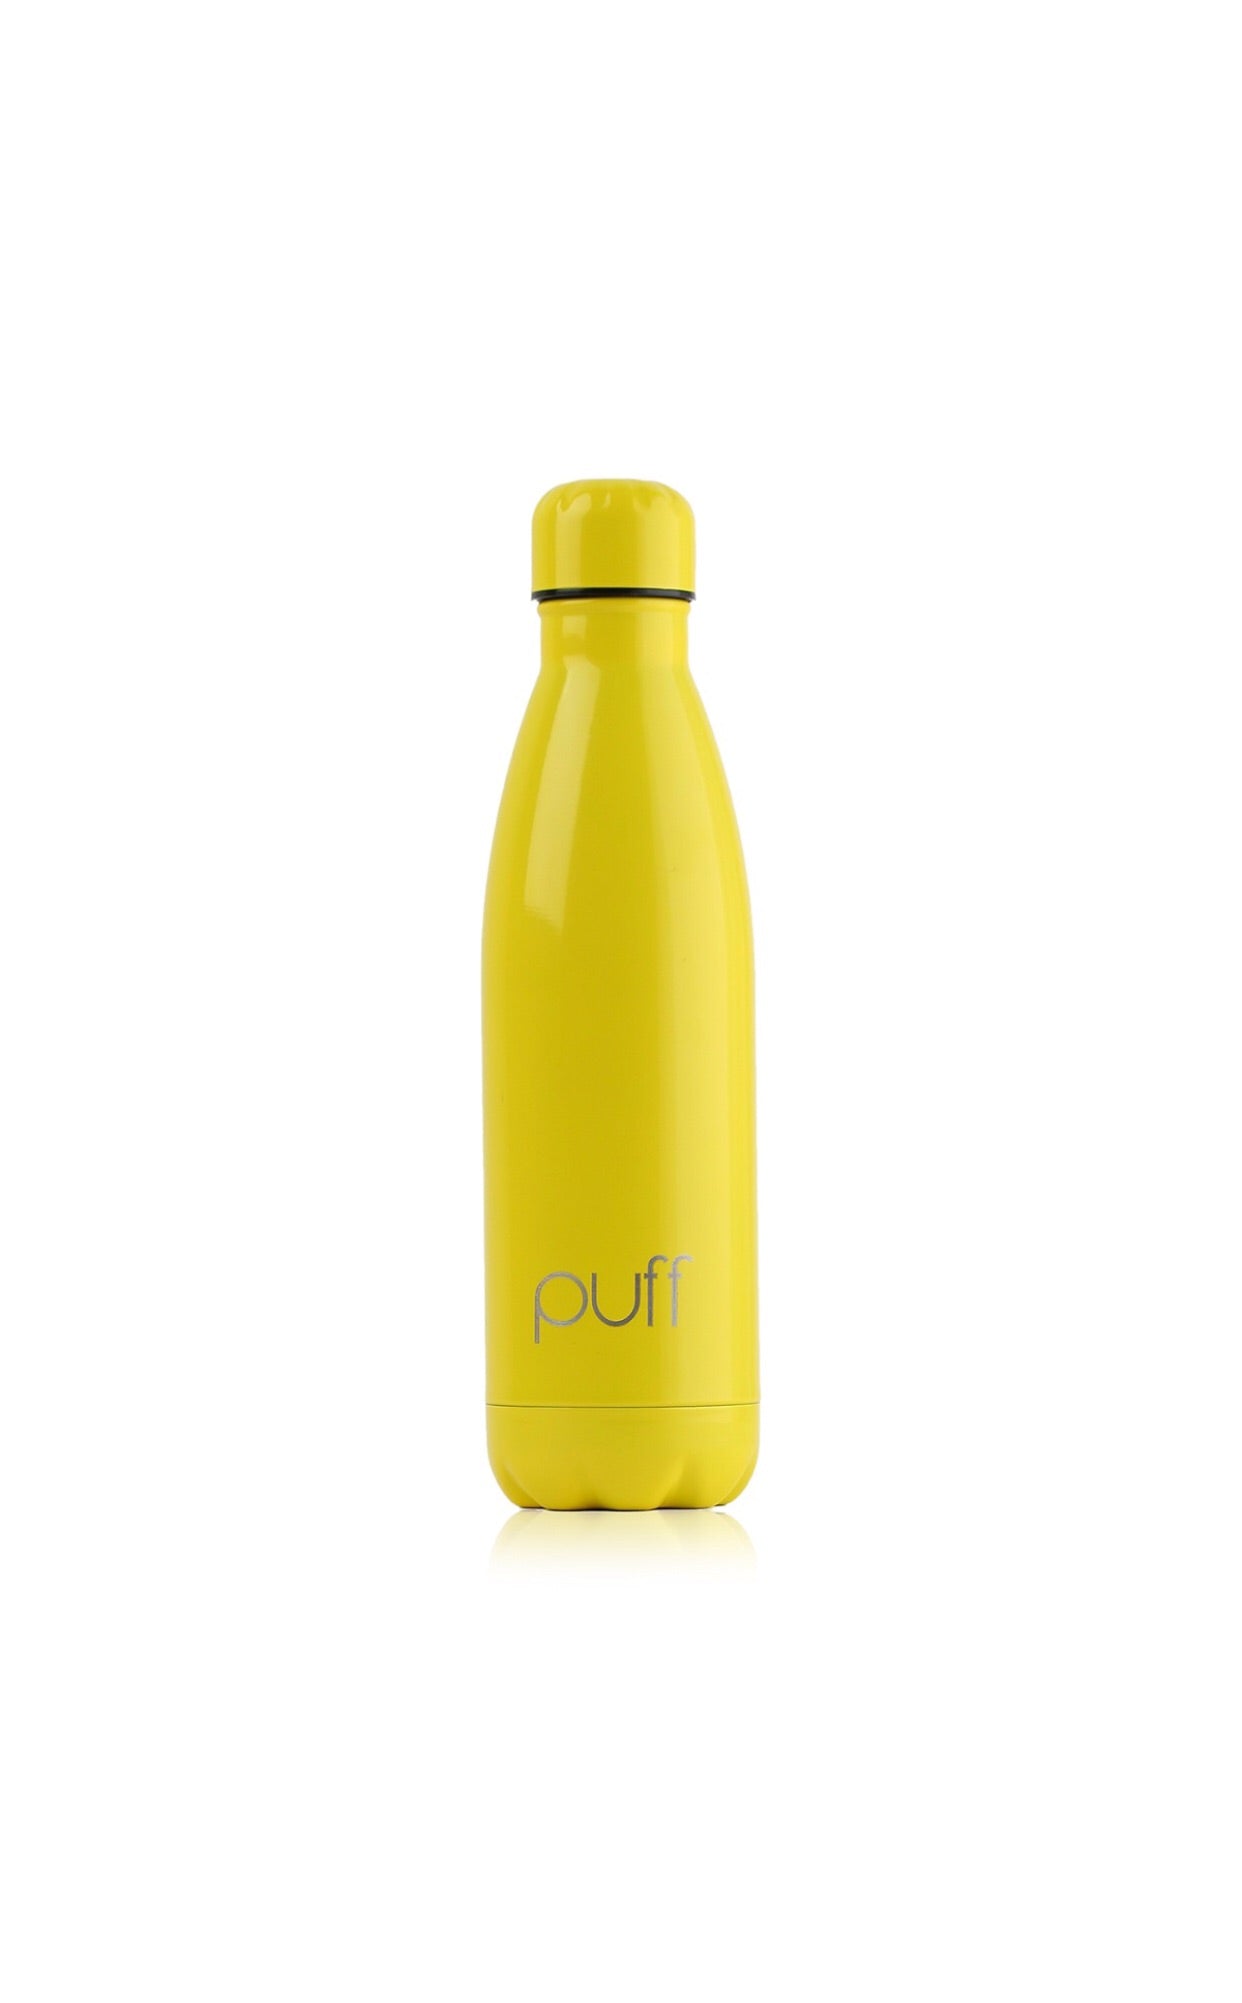 puff | Yellow Stainless Steel Bottle. "500ml"